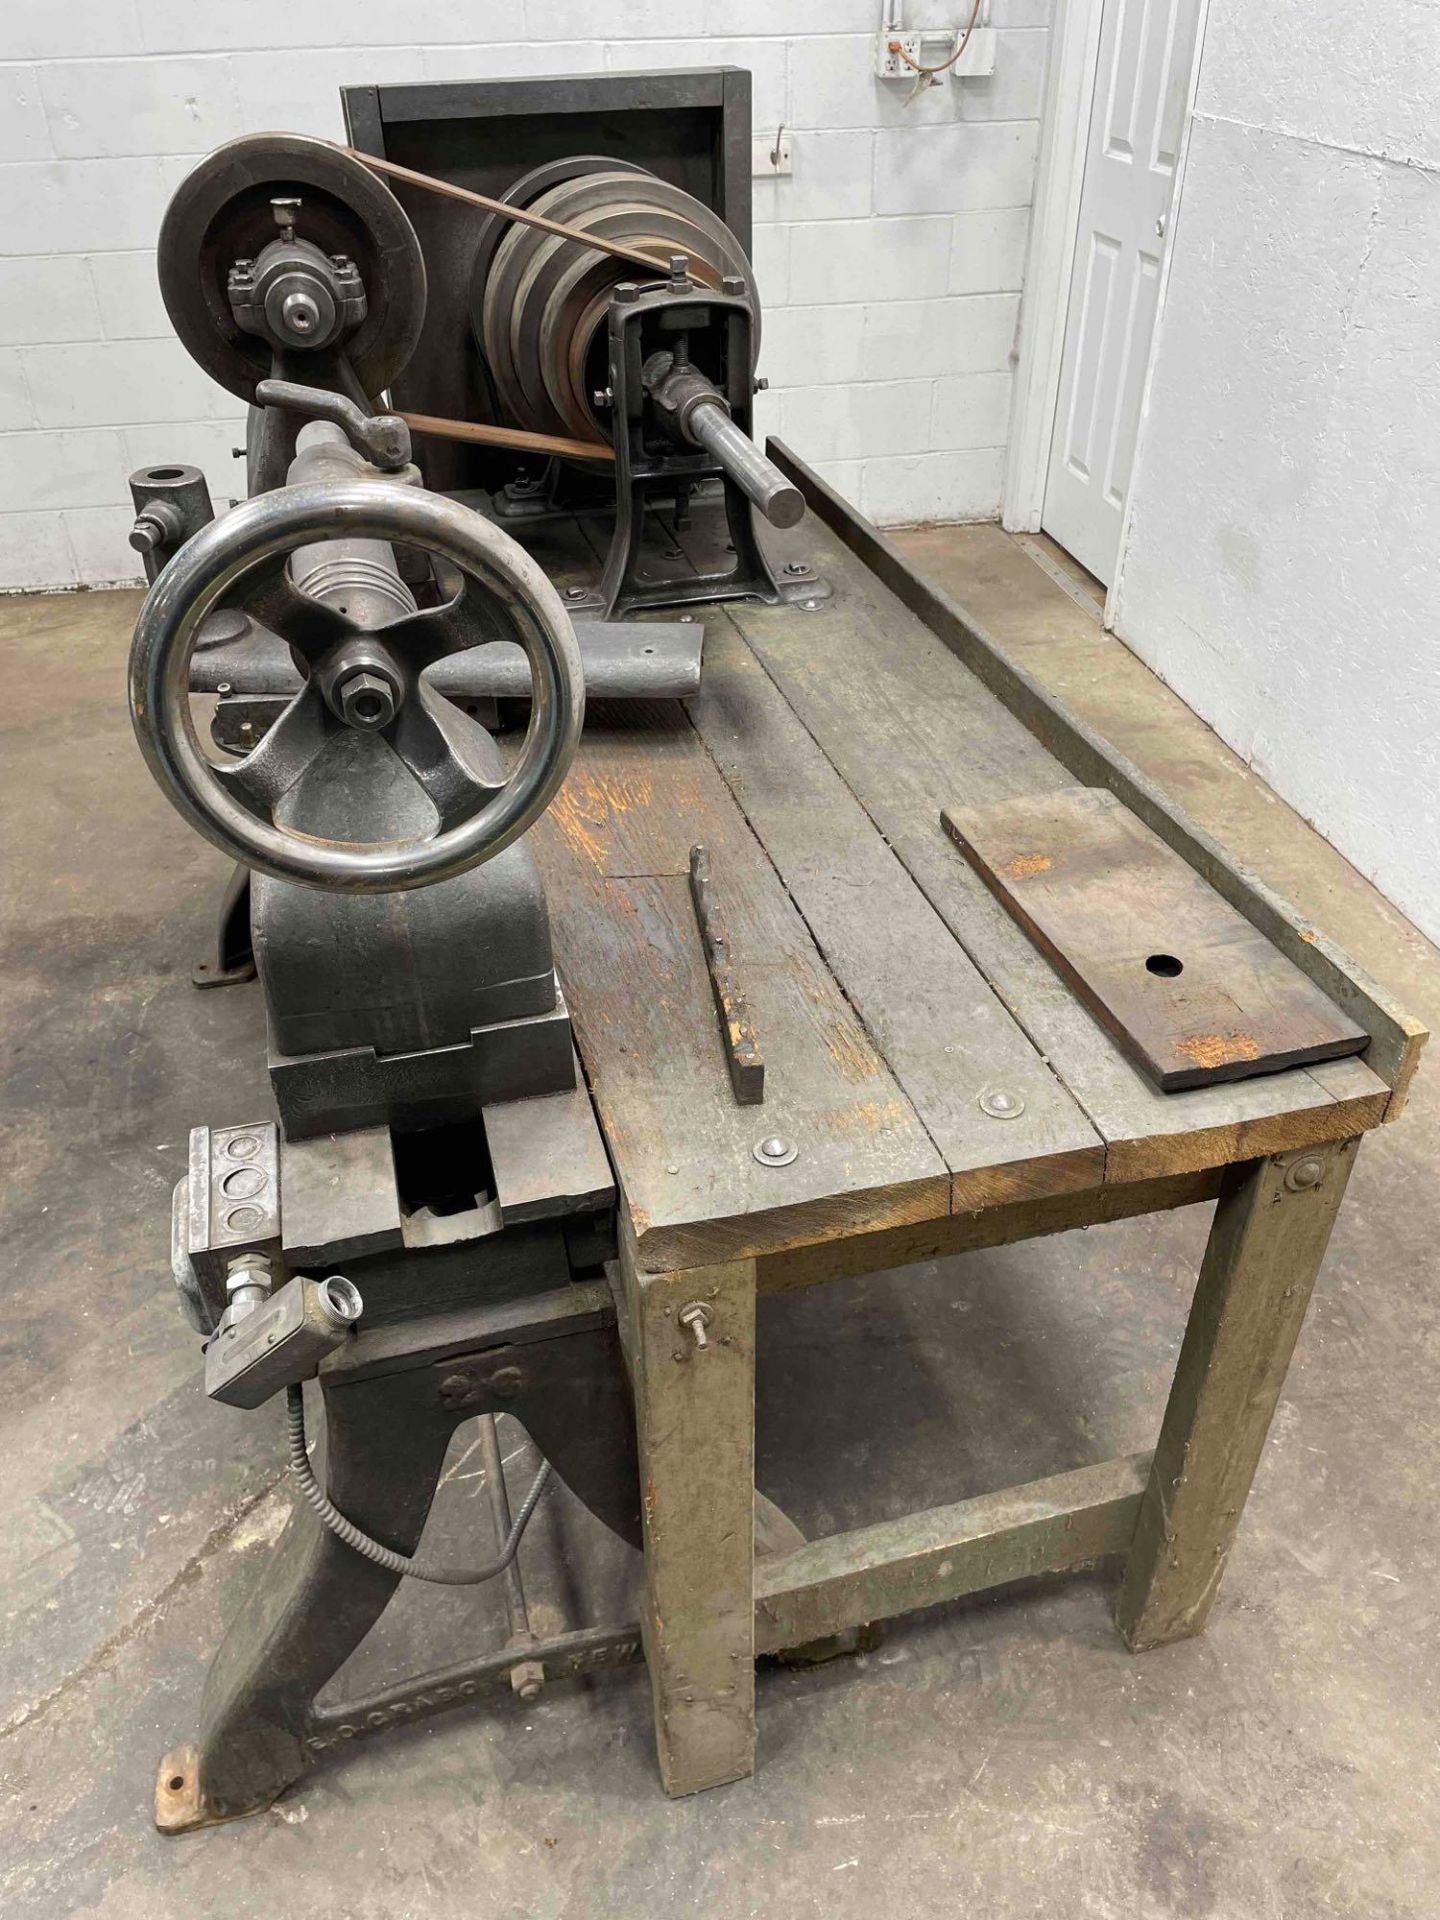 E.O.Grabo Machine Wks Spinning Lathe, 26 in Swing, 24" Between Centers, 1.5 HP, 1 Phase, 208V   $50 - Image 6 of 19